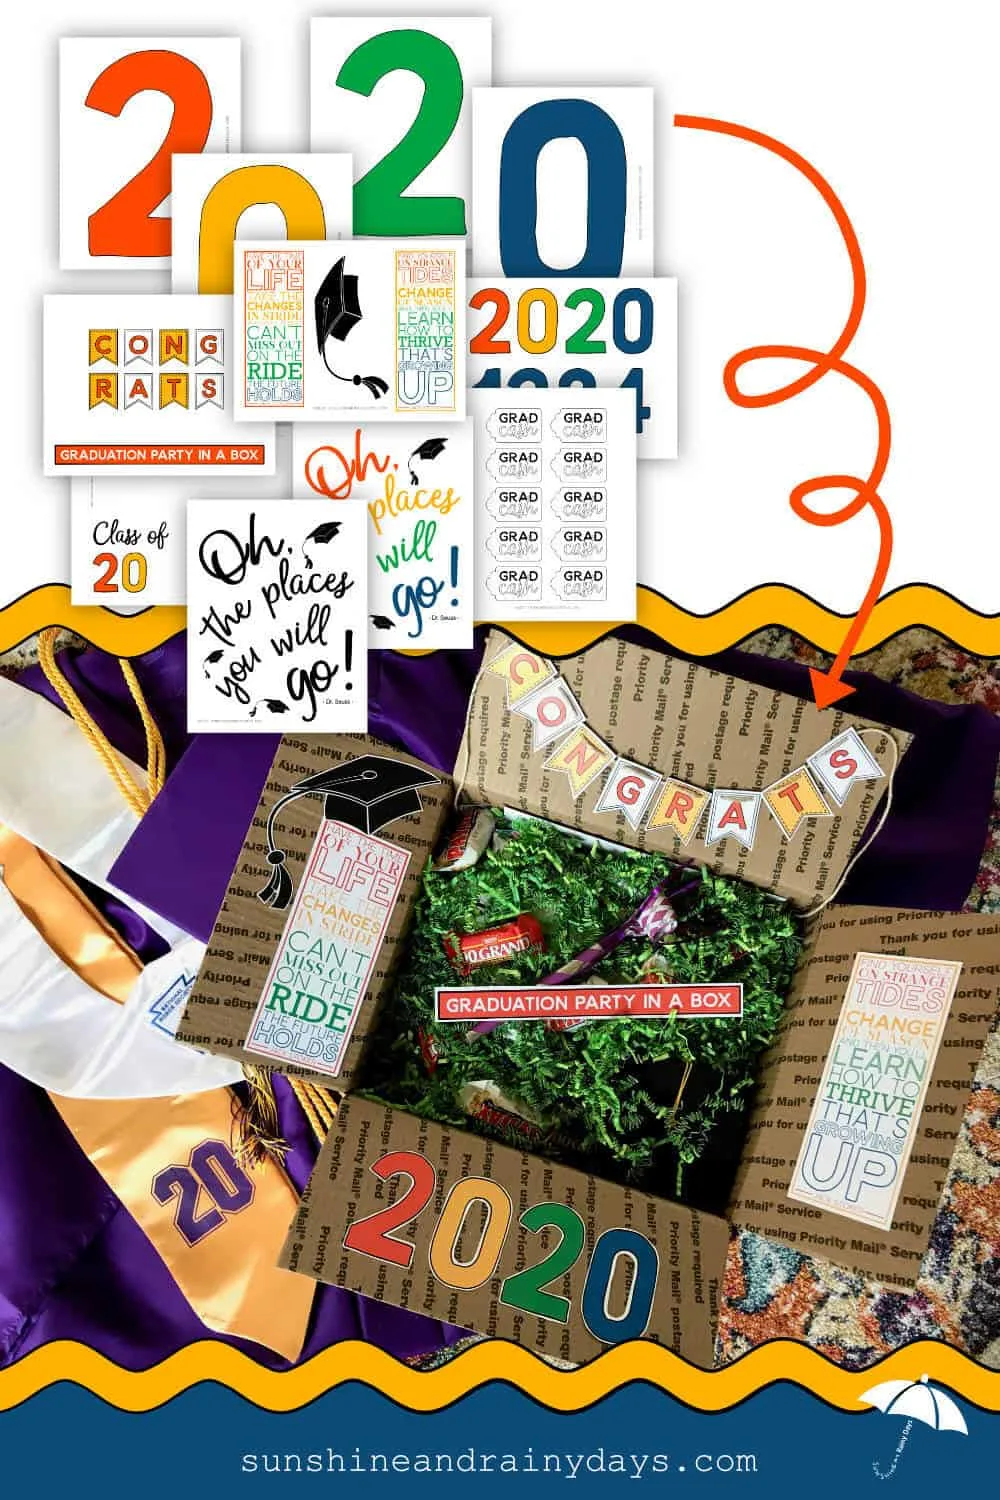 Graduation Printables used to decorate a Graduation Box full of Graduation Gifts and Party Supplies